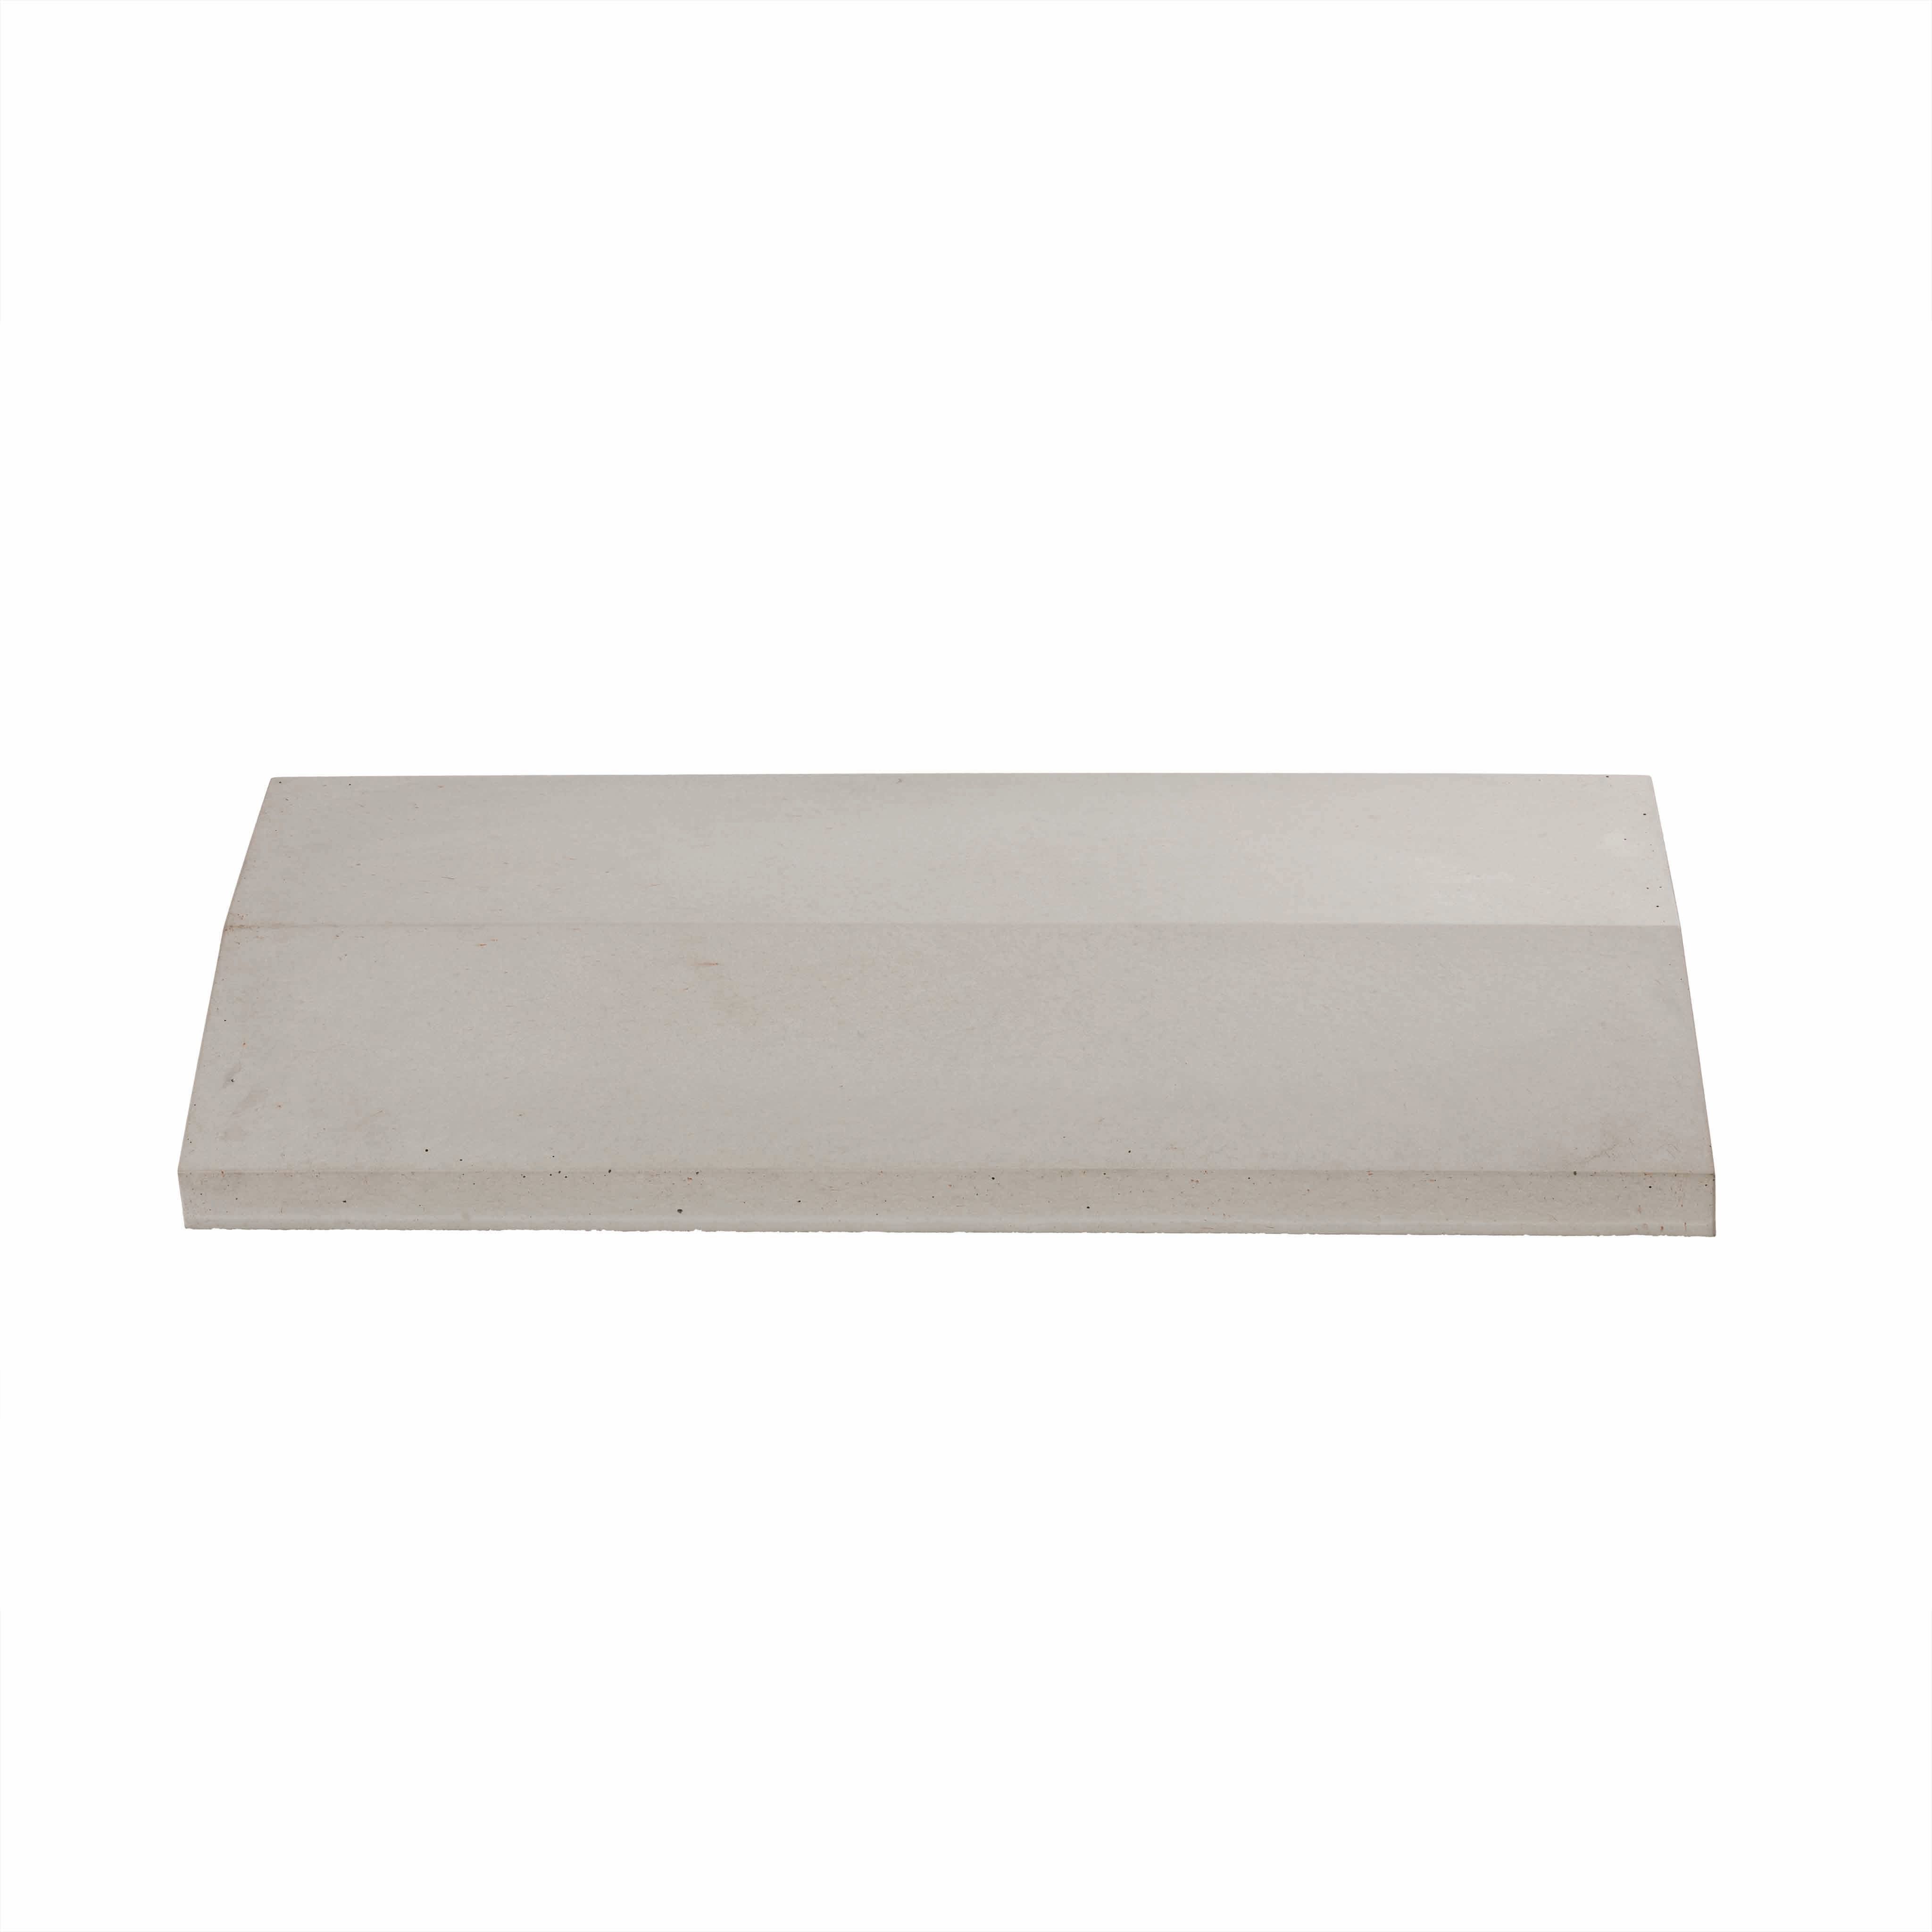 Image of Marshalls Smooth Cast Coping Stone - Grey 140 x 600 x 50mm